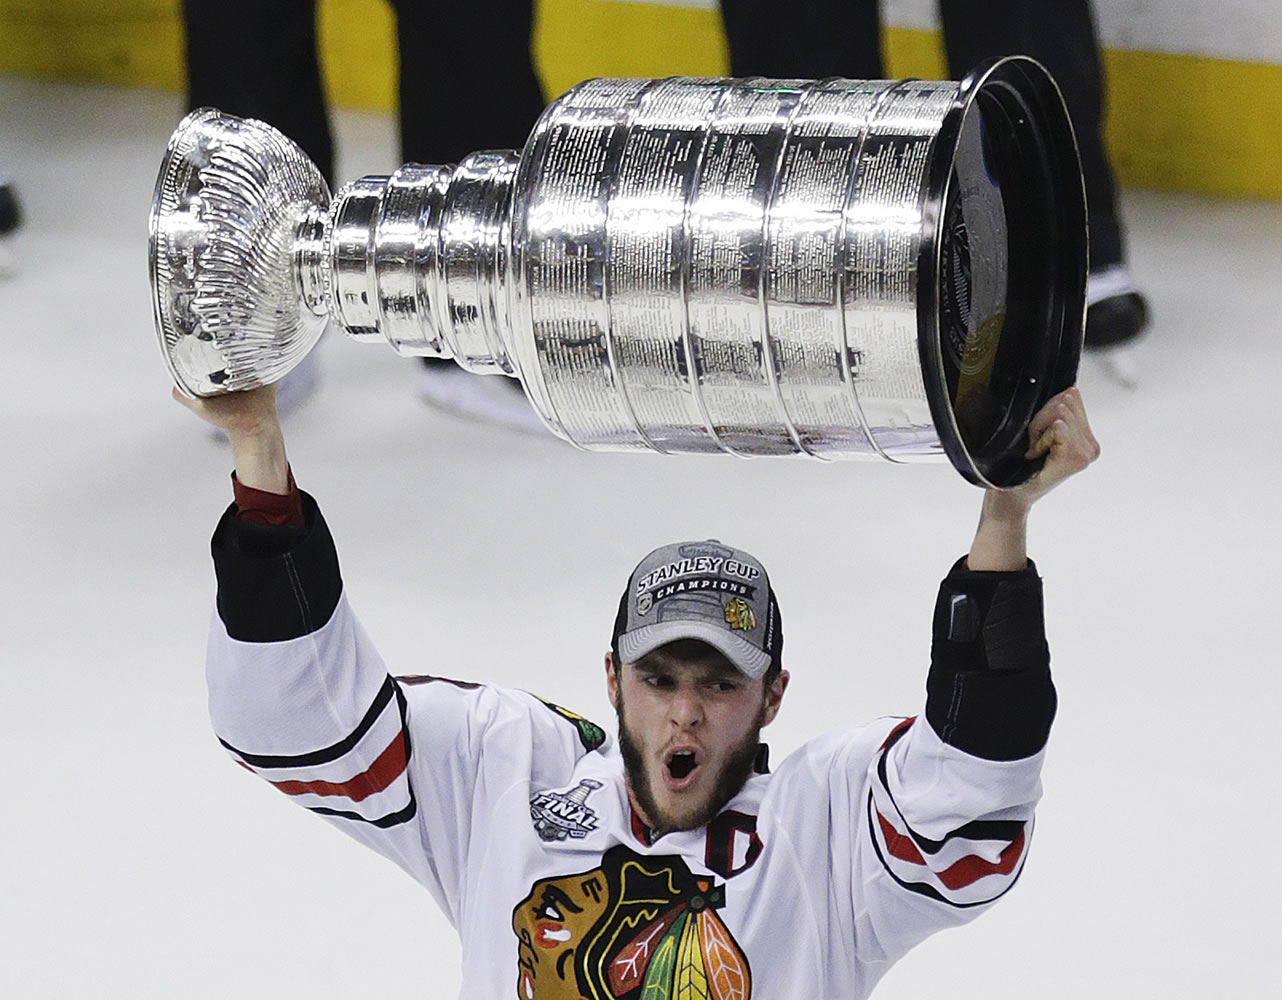 Stanley Cup Final MVP Patrick Kane hoists the Stanley Cup after beating the Boston Bruins 3-2 in Game 6 of the Stanley Cup Final on Monday.